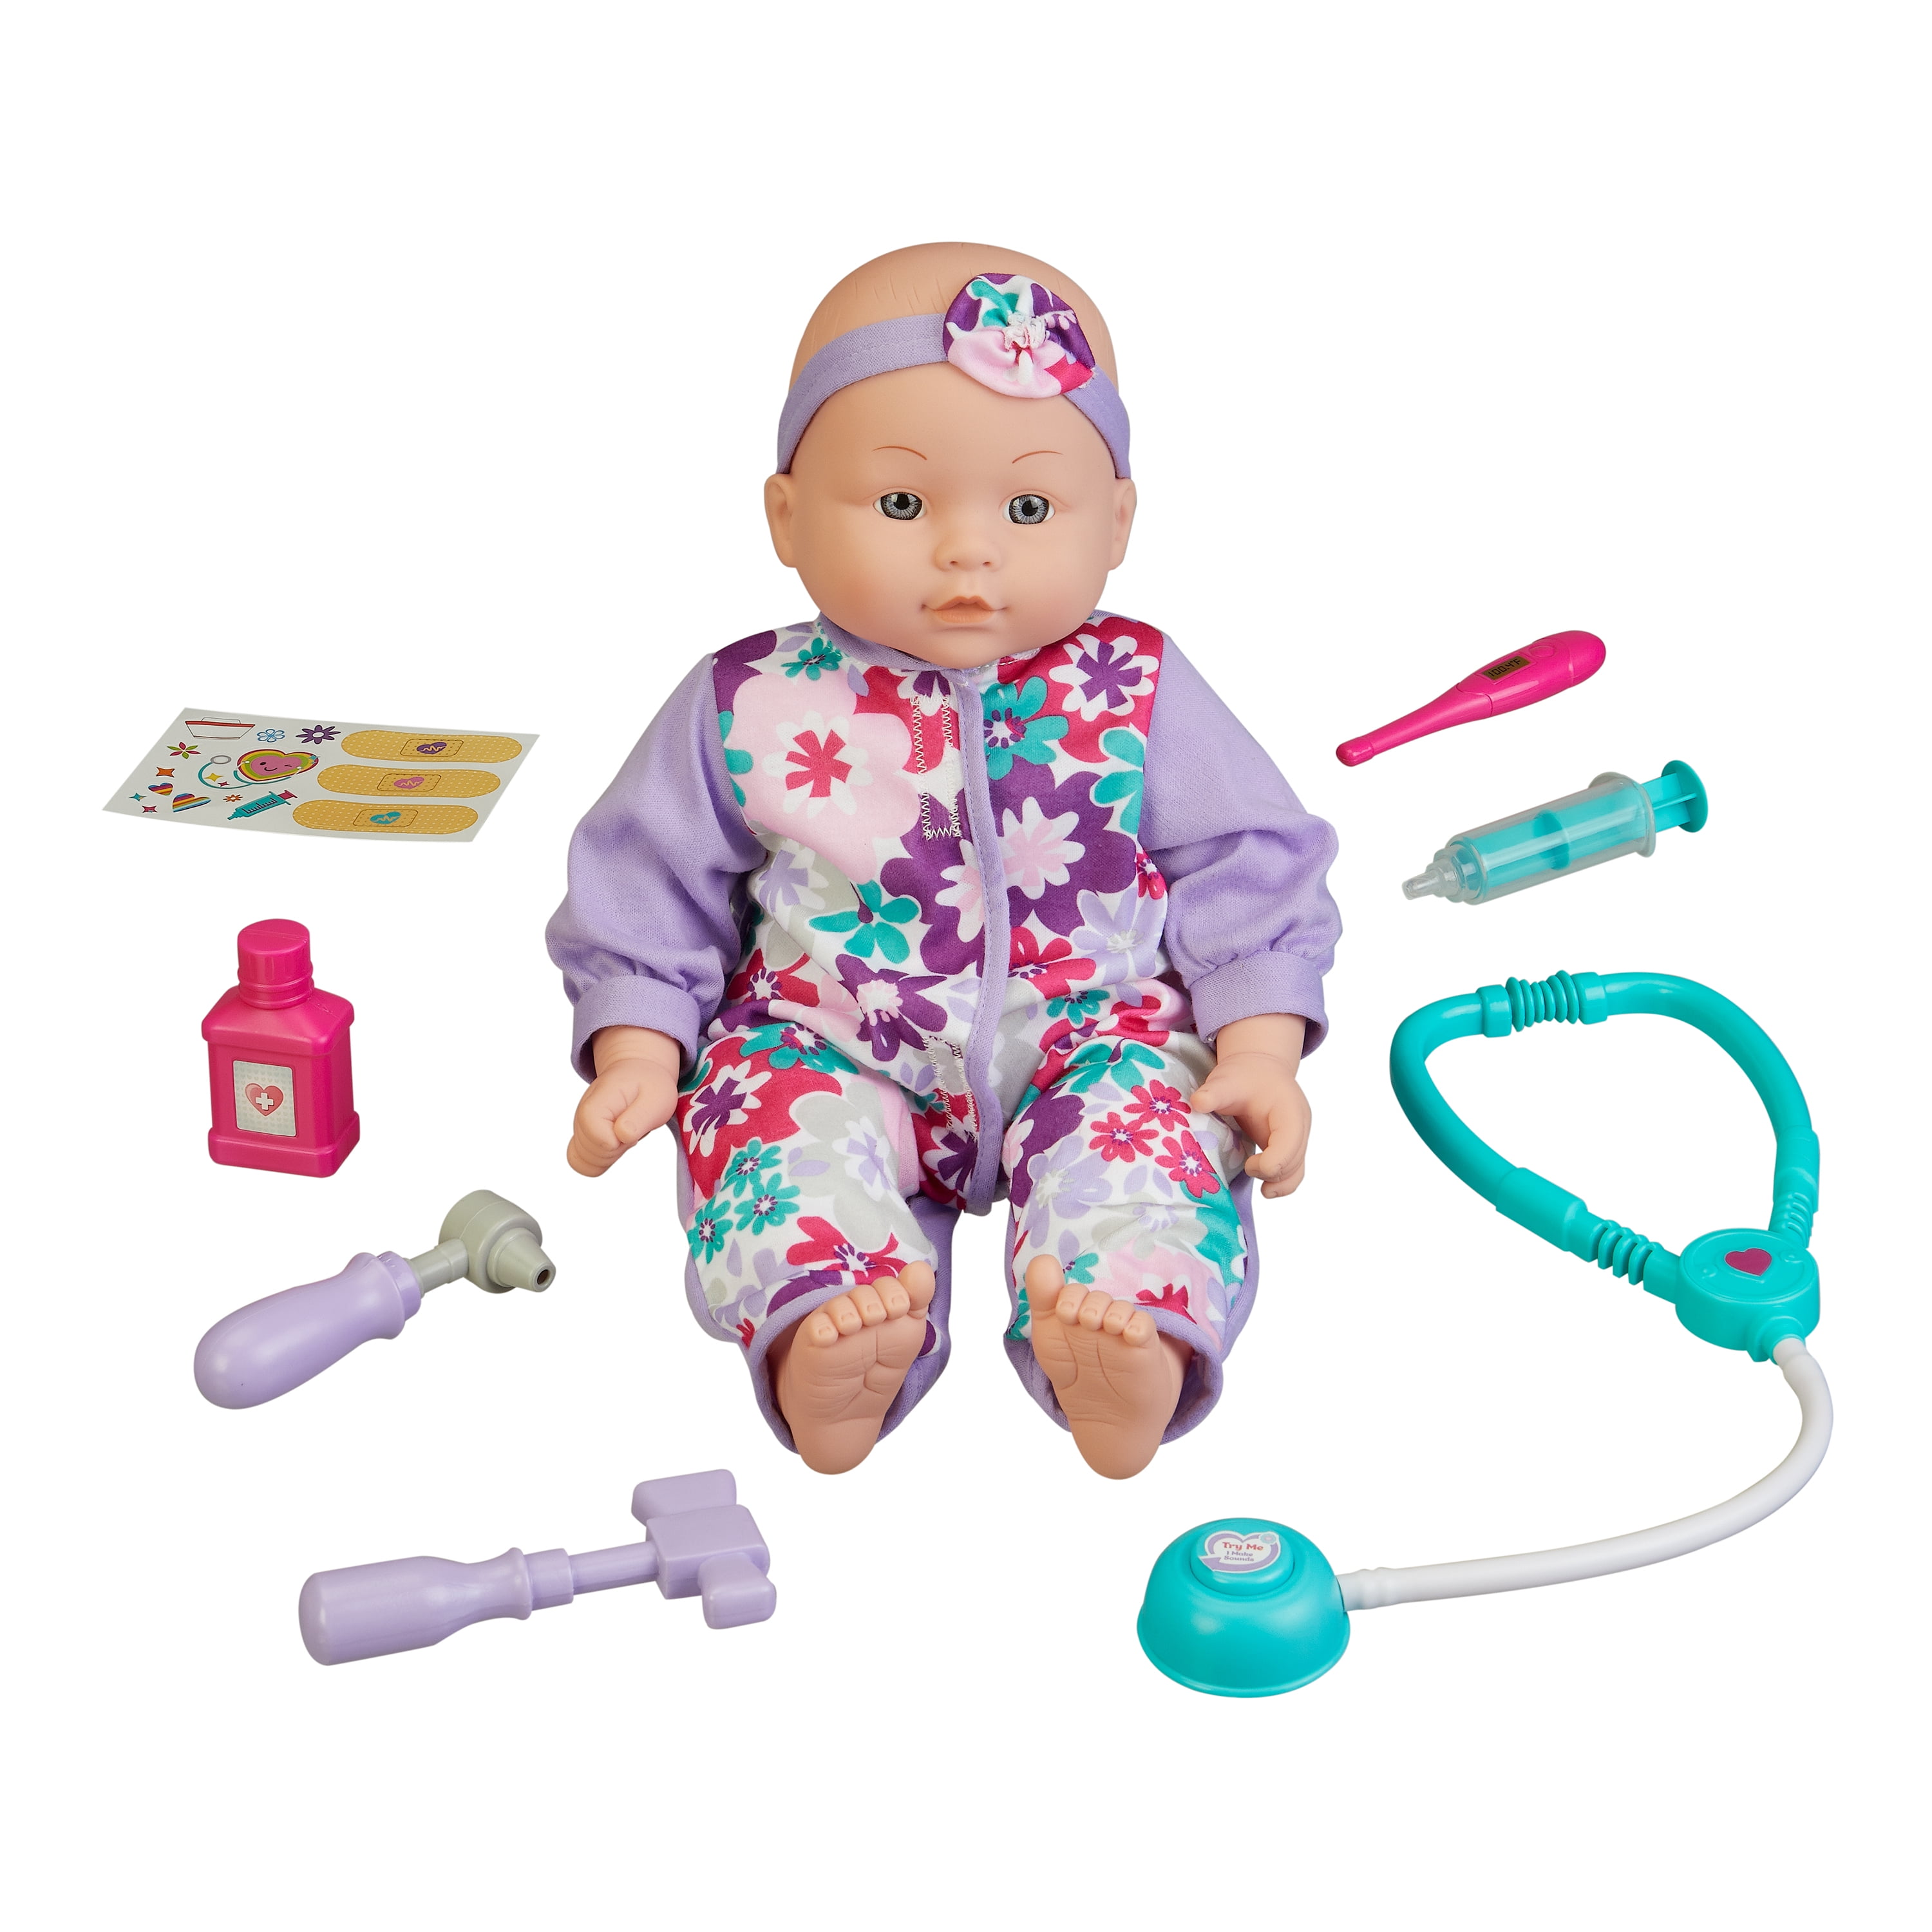 doctor set with doll